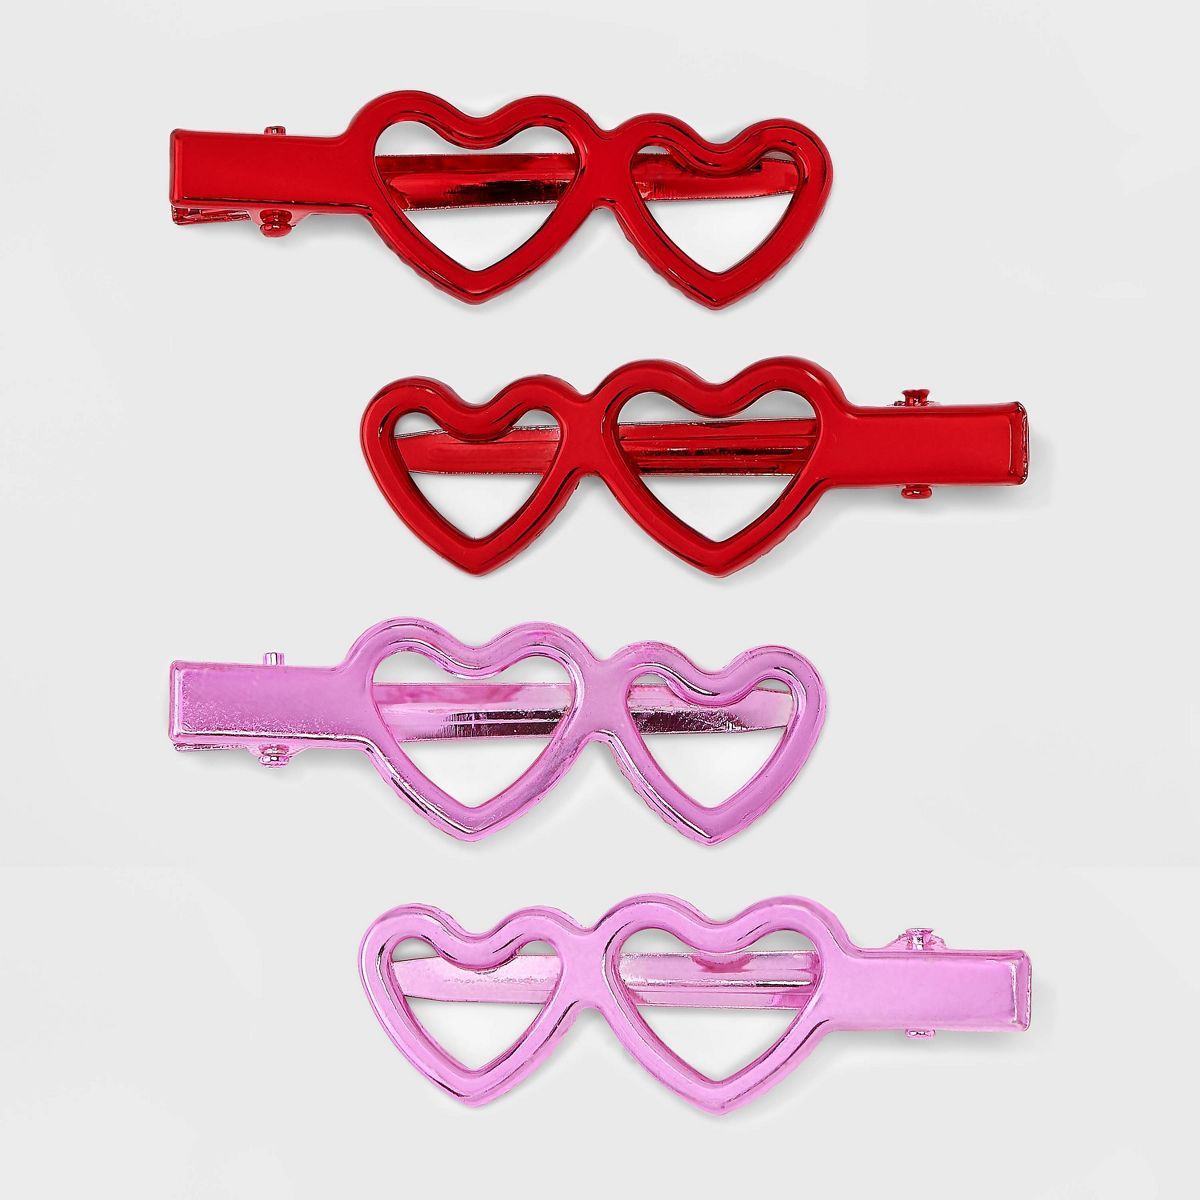 Double Heart Metal Hair Clip Set 4pc - Pink/Red | Target